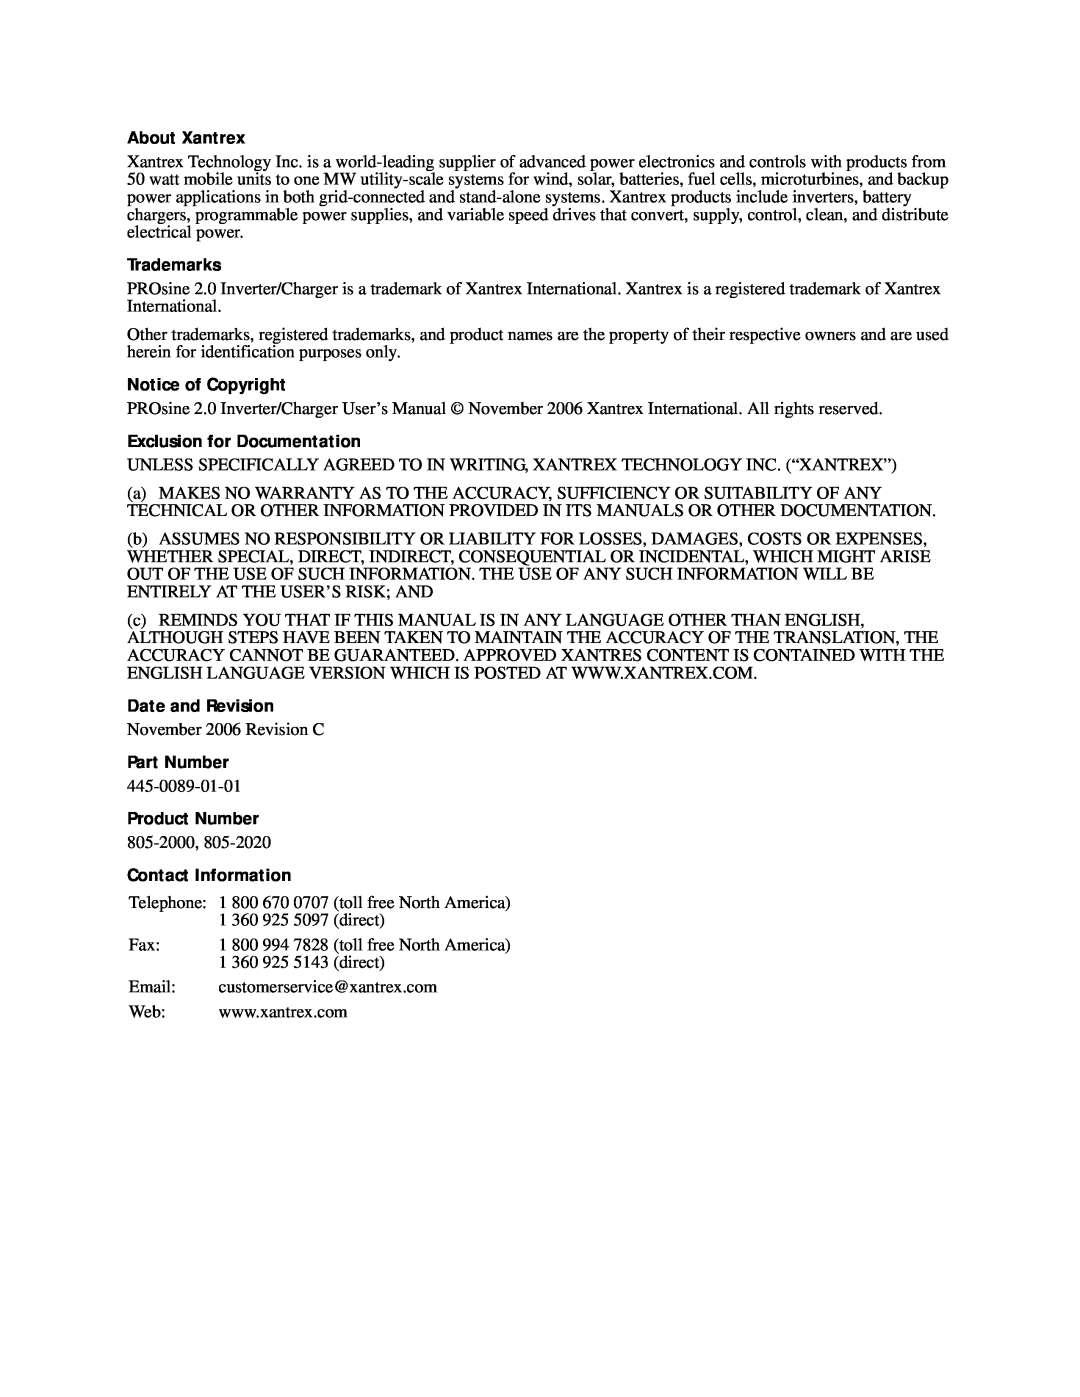 Xantrex Technology PROsine 2.0 About Xantrex, Trademarks, Notice of Copyright, Exclusion for Documentation, Part Number 